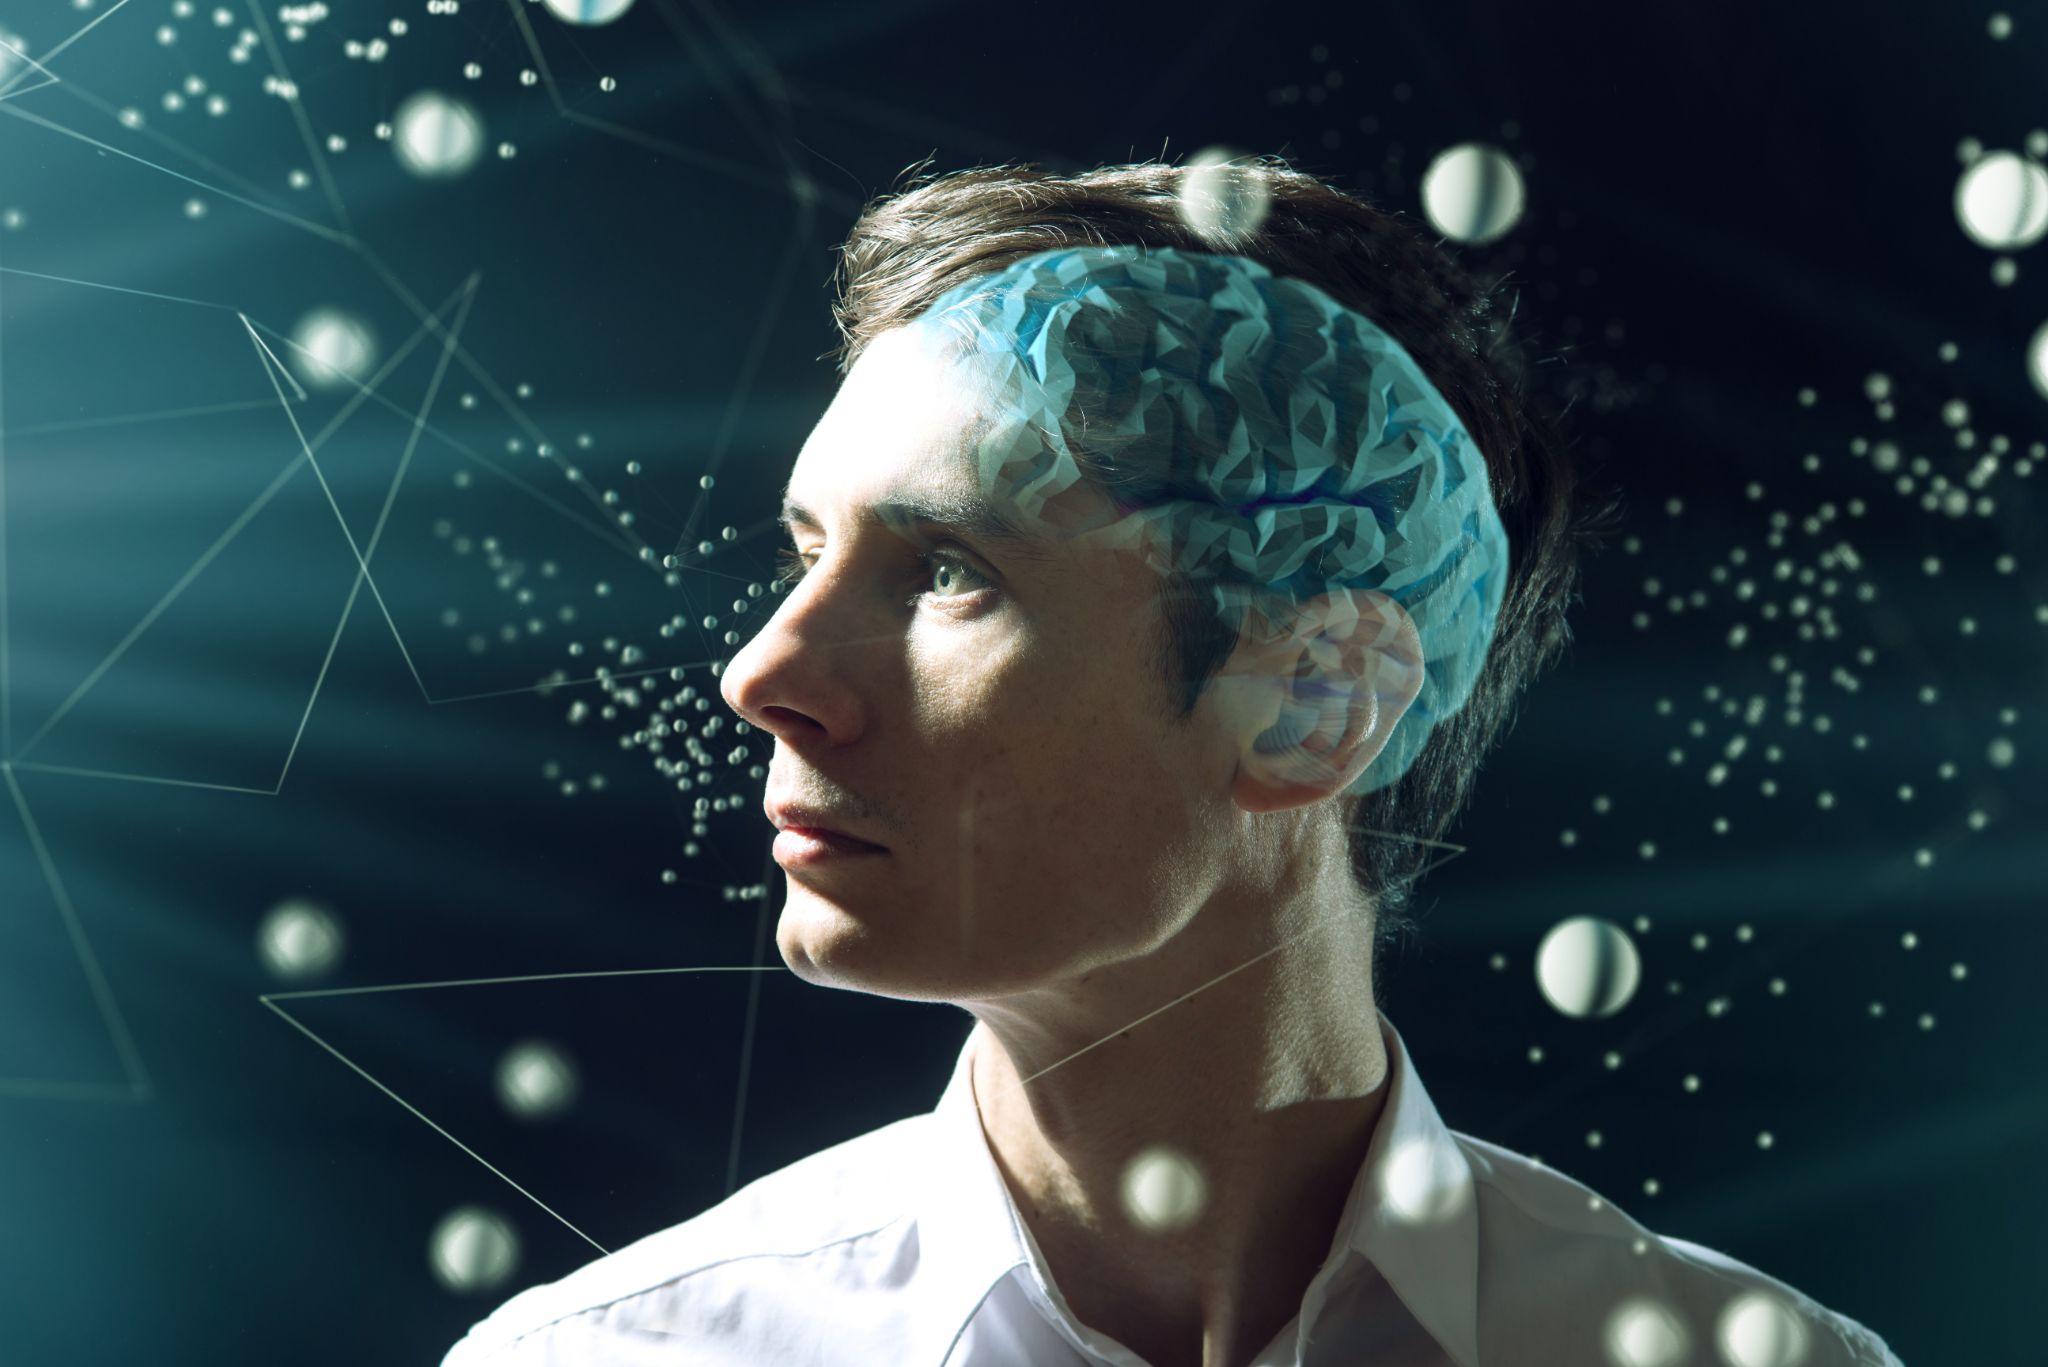 The man's head businessman with digital brain and the grid connections of neurons